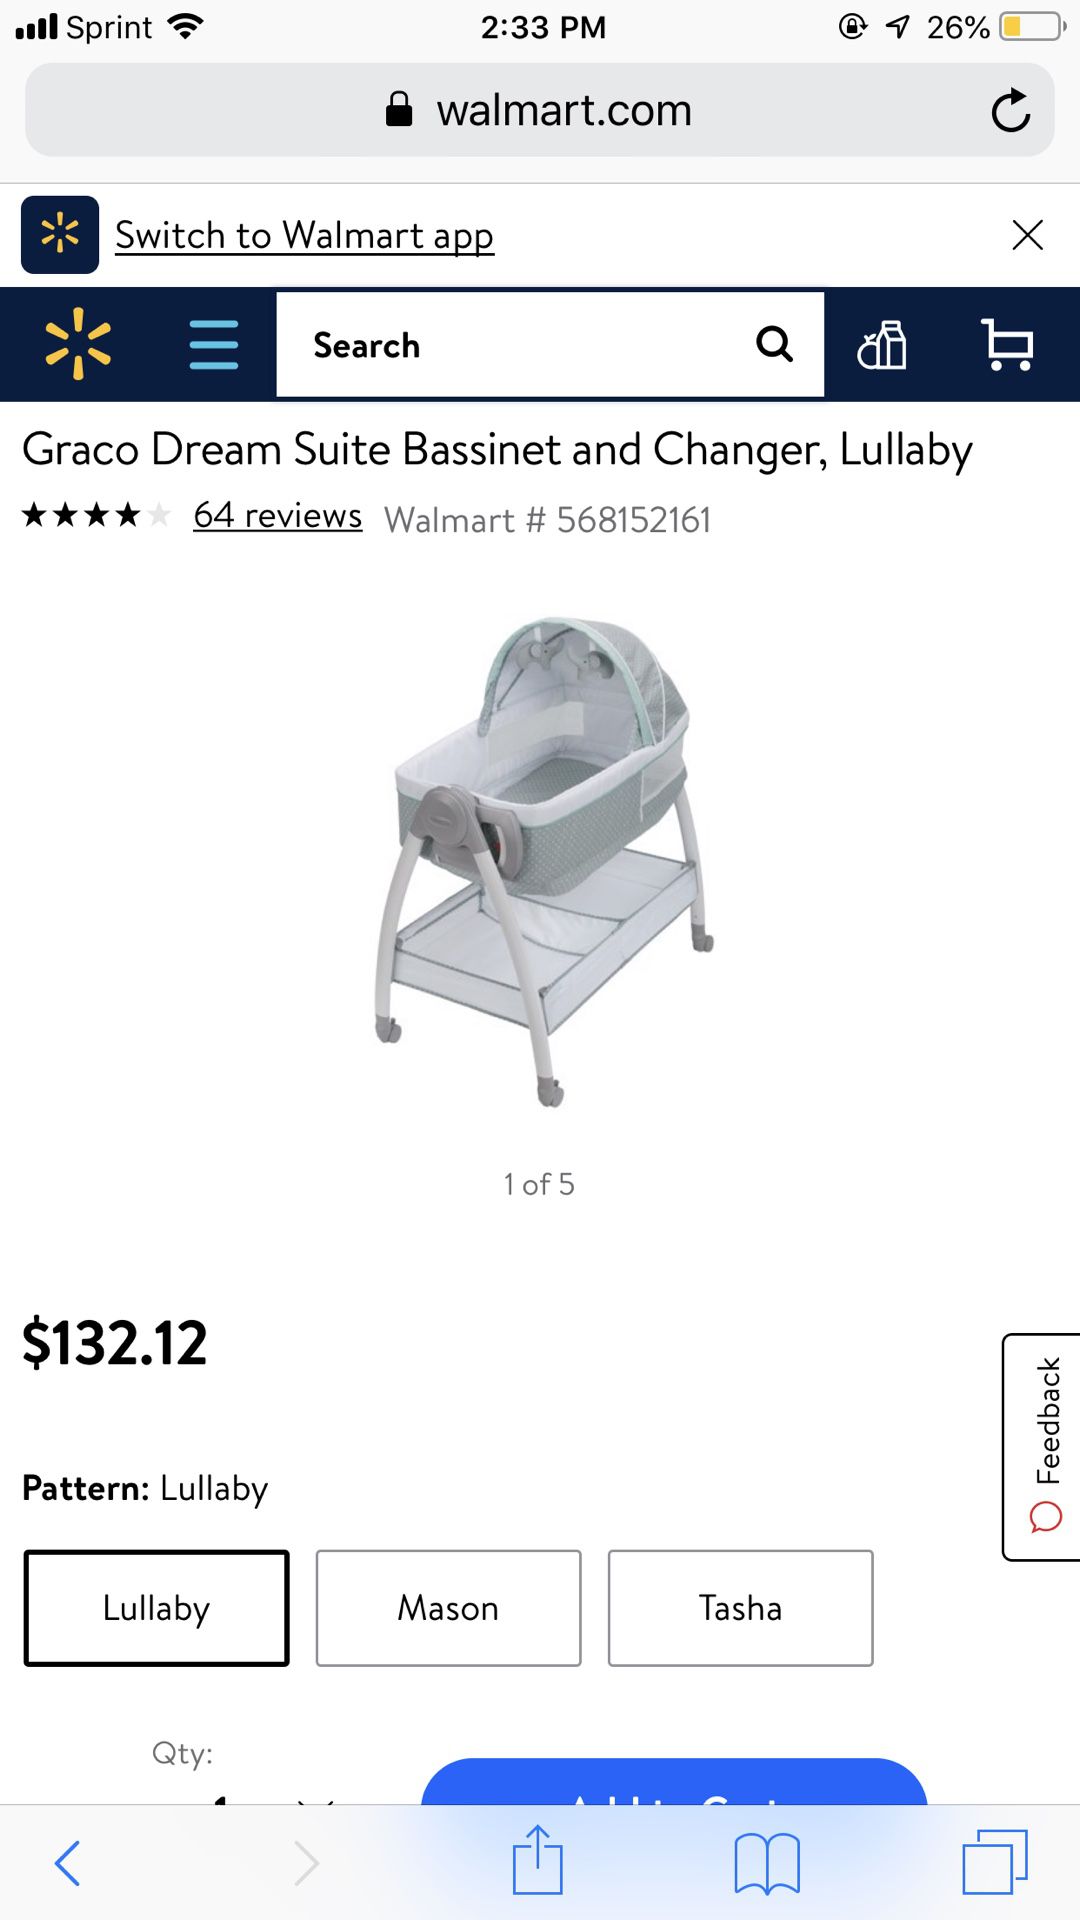 Graco Dream Suite Bassinet and Changer